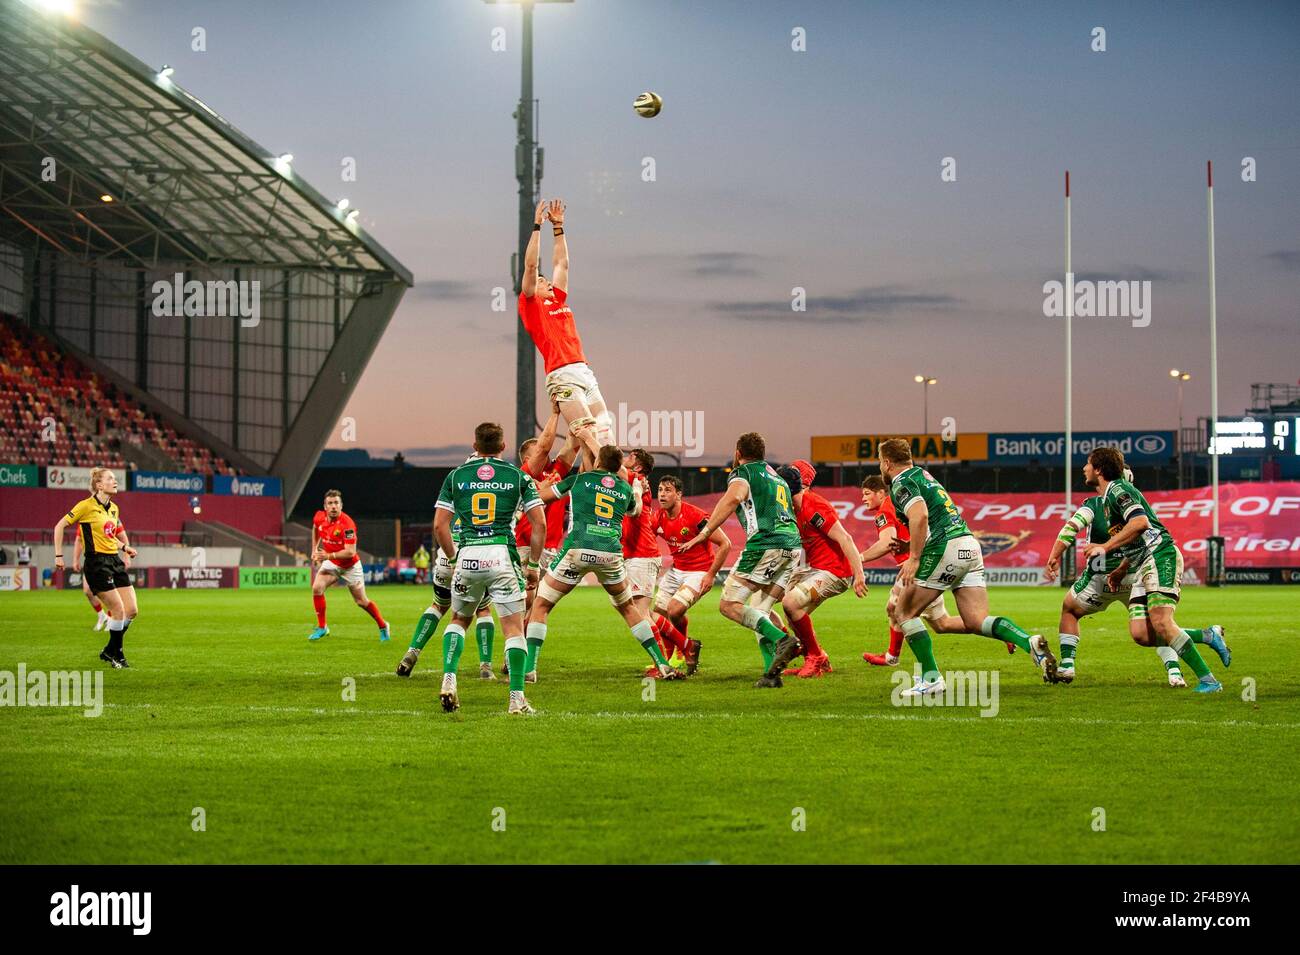 Limerick, Ireland. 19th Mar, 2021. Players in action during the Guinness PRO14 Round 16 match between Munster Rugby and Benetton Rugby at Thomond Park in Limerick, Ireland on March 19, 2021 (Photo by Andrew SURMA/SIPA USA) Credit: Sipa USA/Alamy Live News Stock Photo